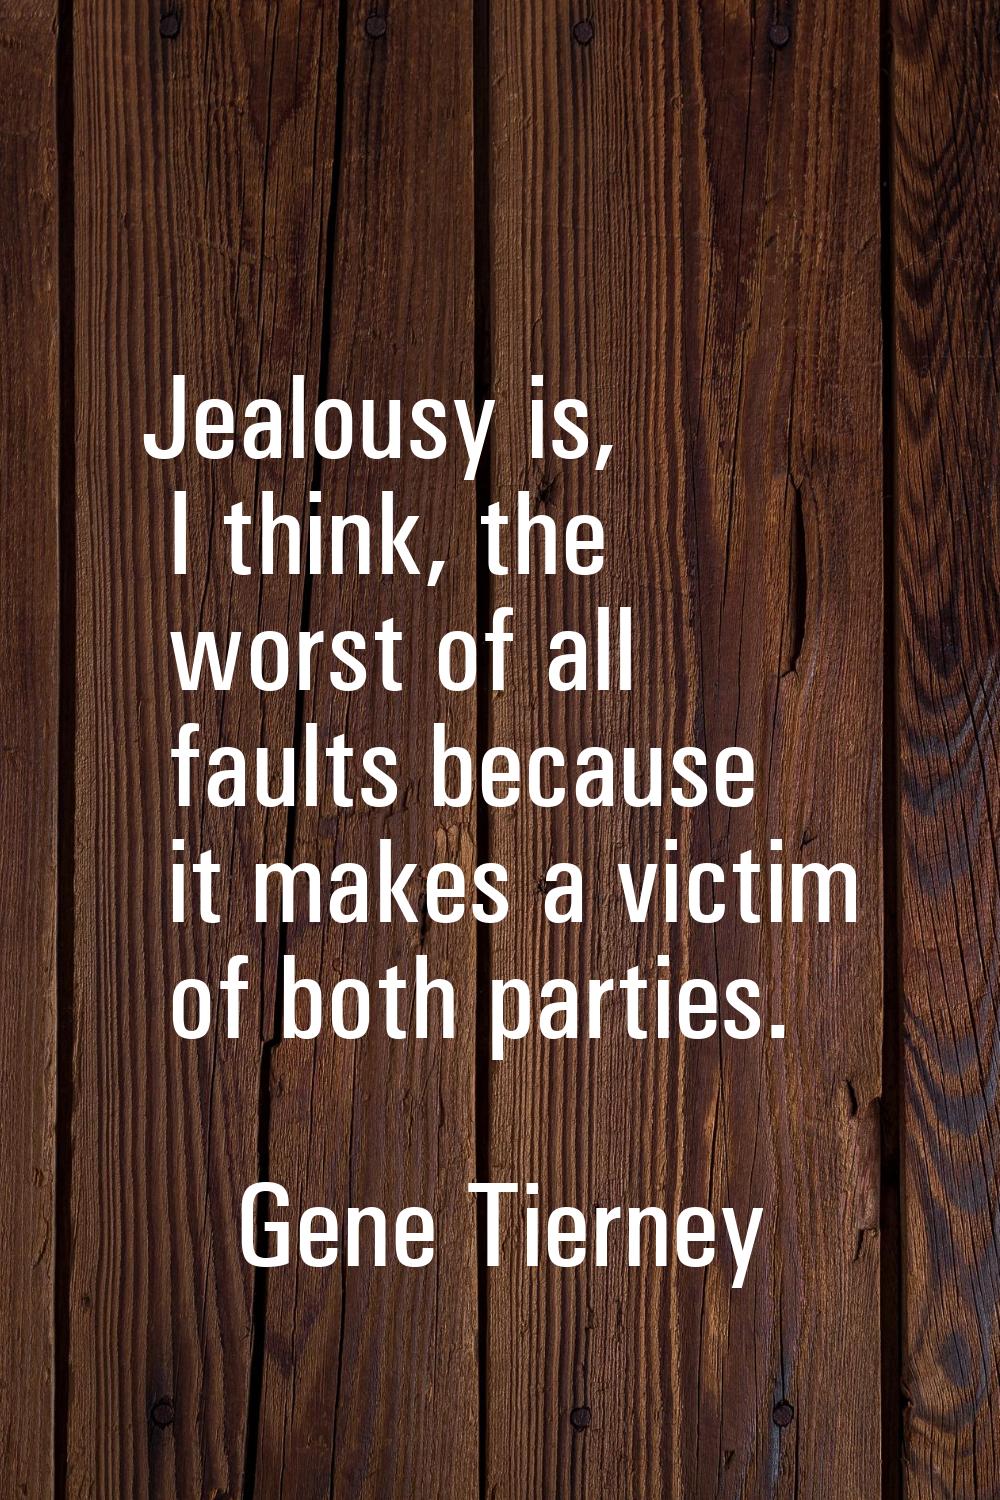 Jealousy is, I think, the worst of all faults because it makes a victim of both parties.